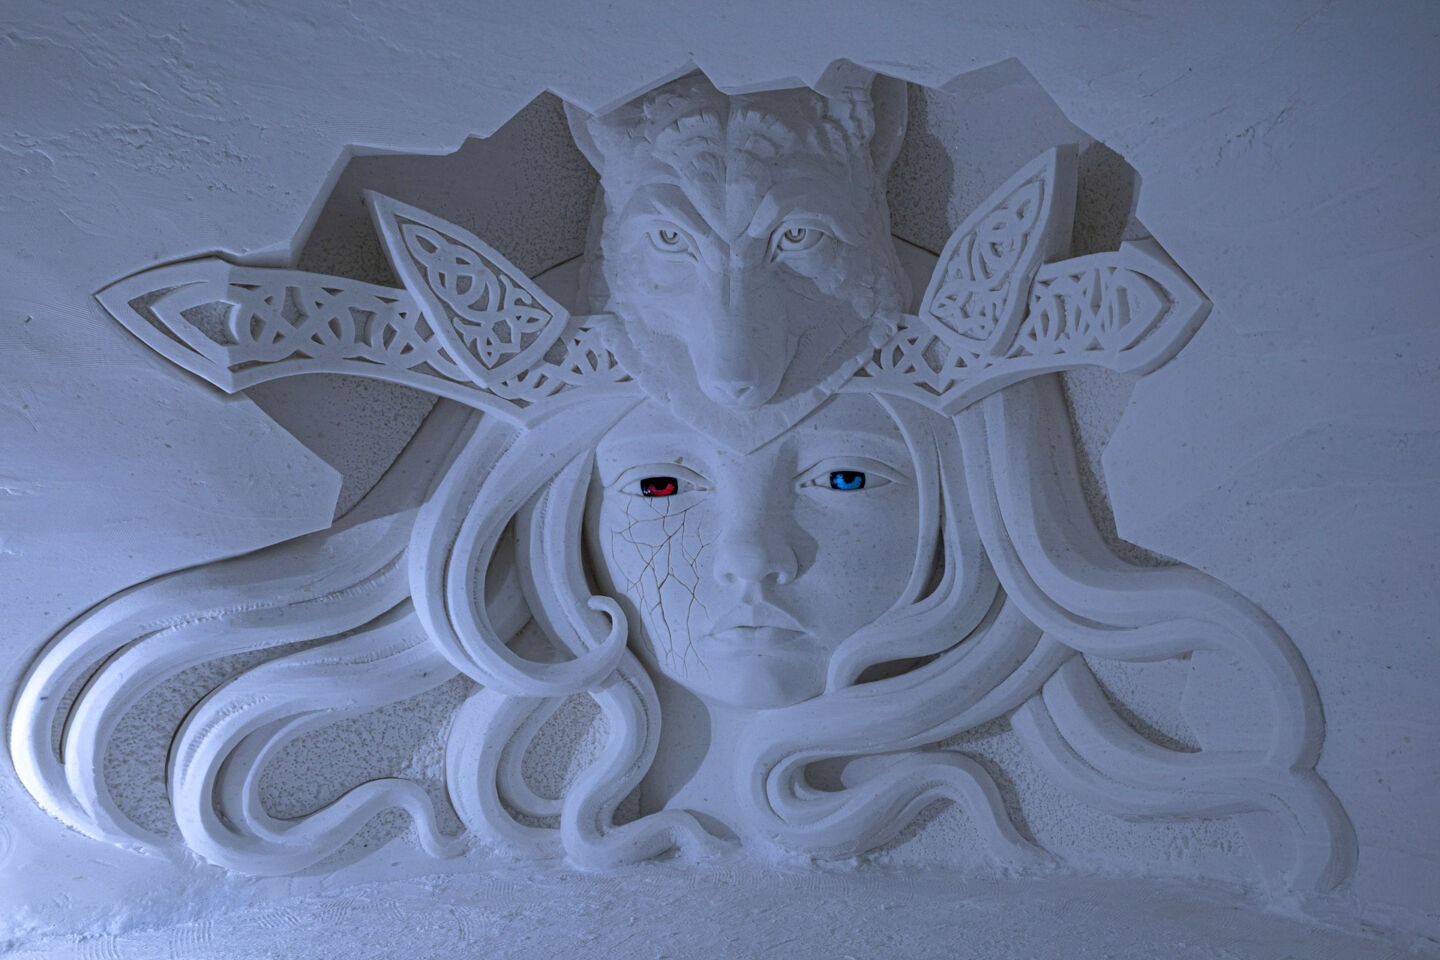 Wall relief made of snow at the Lapland Hotels Snowvillage, a Finnish Lapland filming location